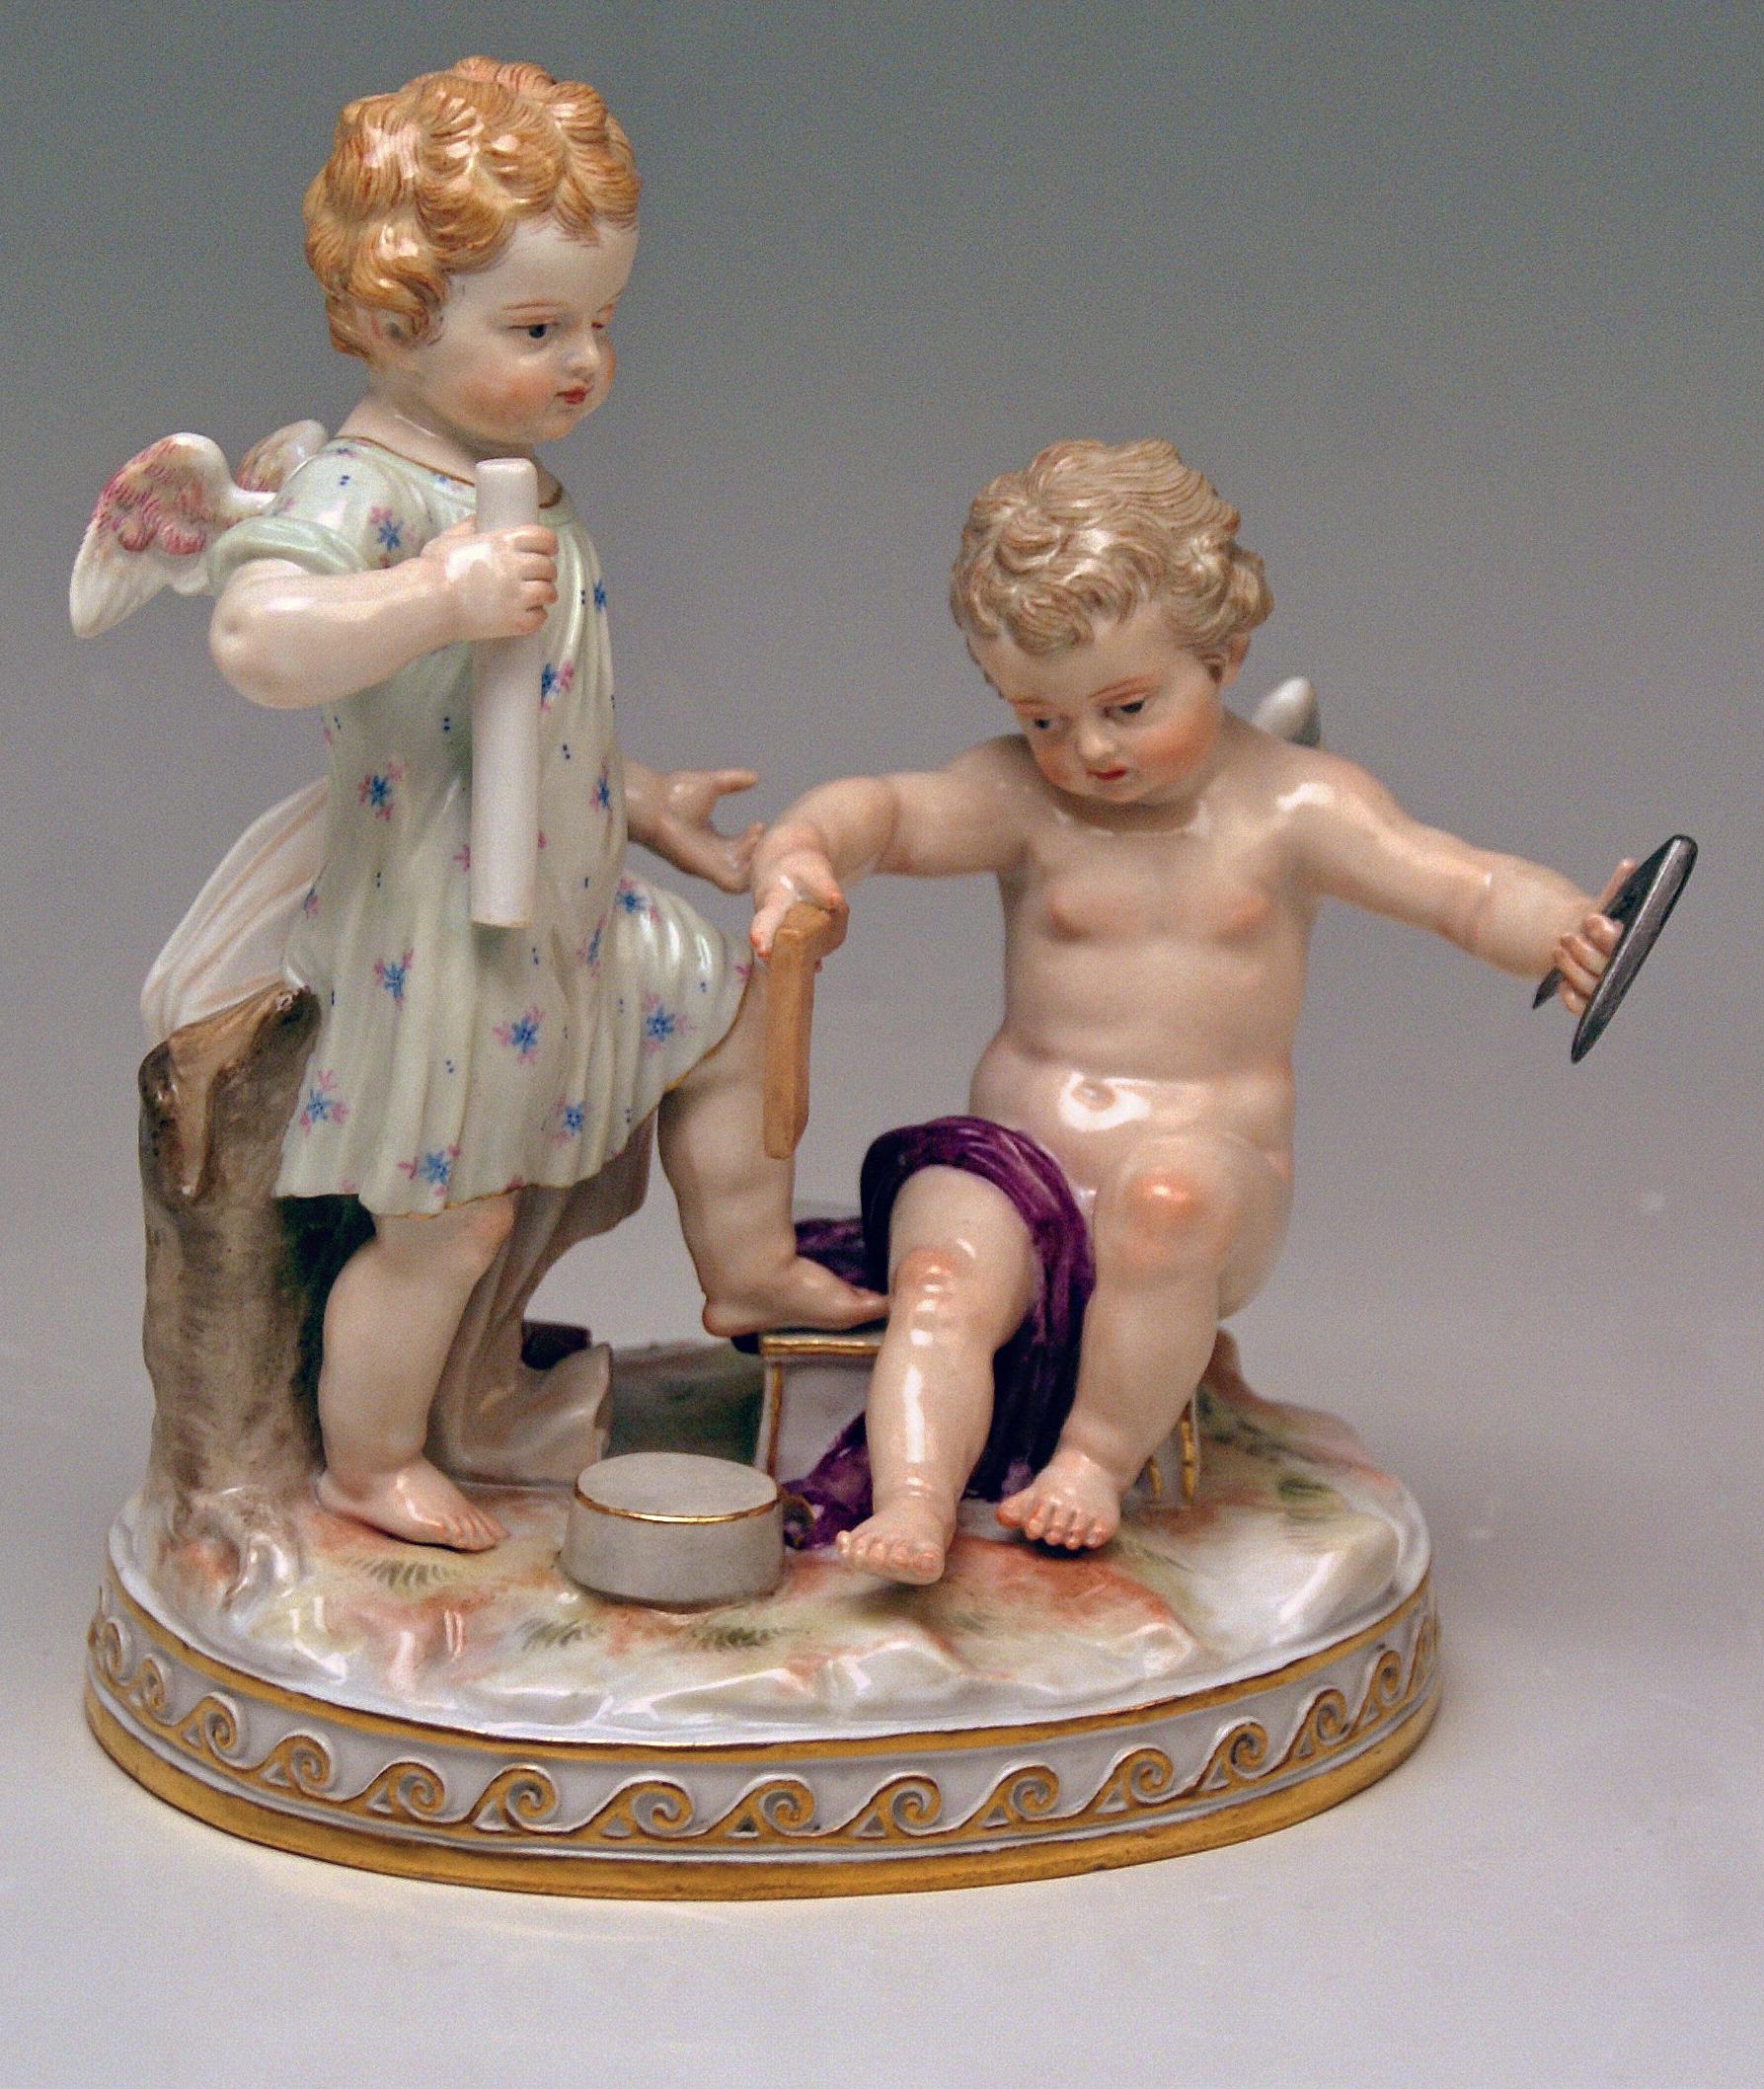 Meissen gorgeous figurine group: Cherubs personifying Allegory of Geometry
The details are stunningly sculptured = finest modelling!

Design:
Michel Victor Acier (1736-1799) / model C 47 created 1768-1770
The sculptor was born at Versailles /